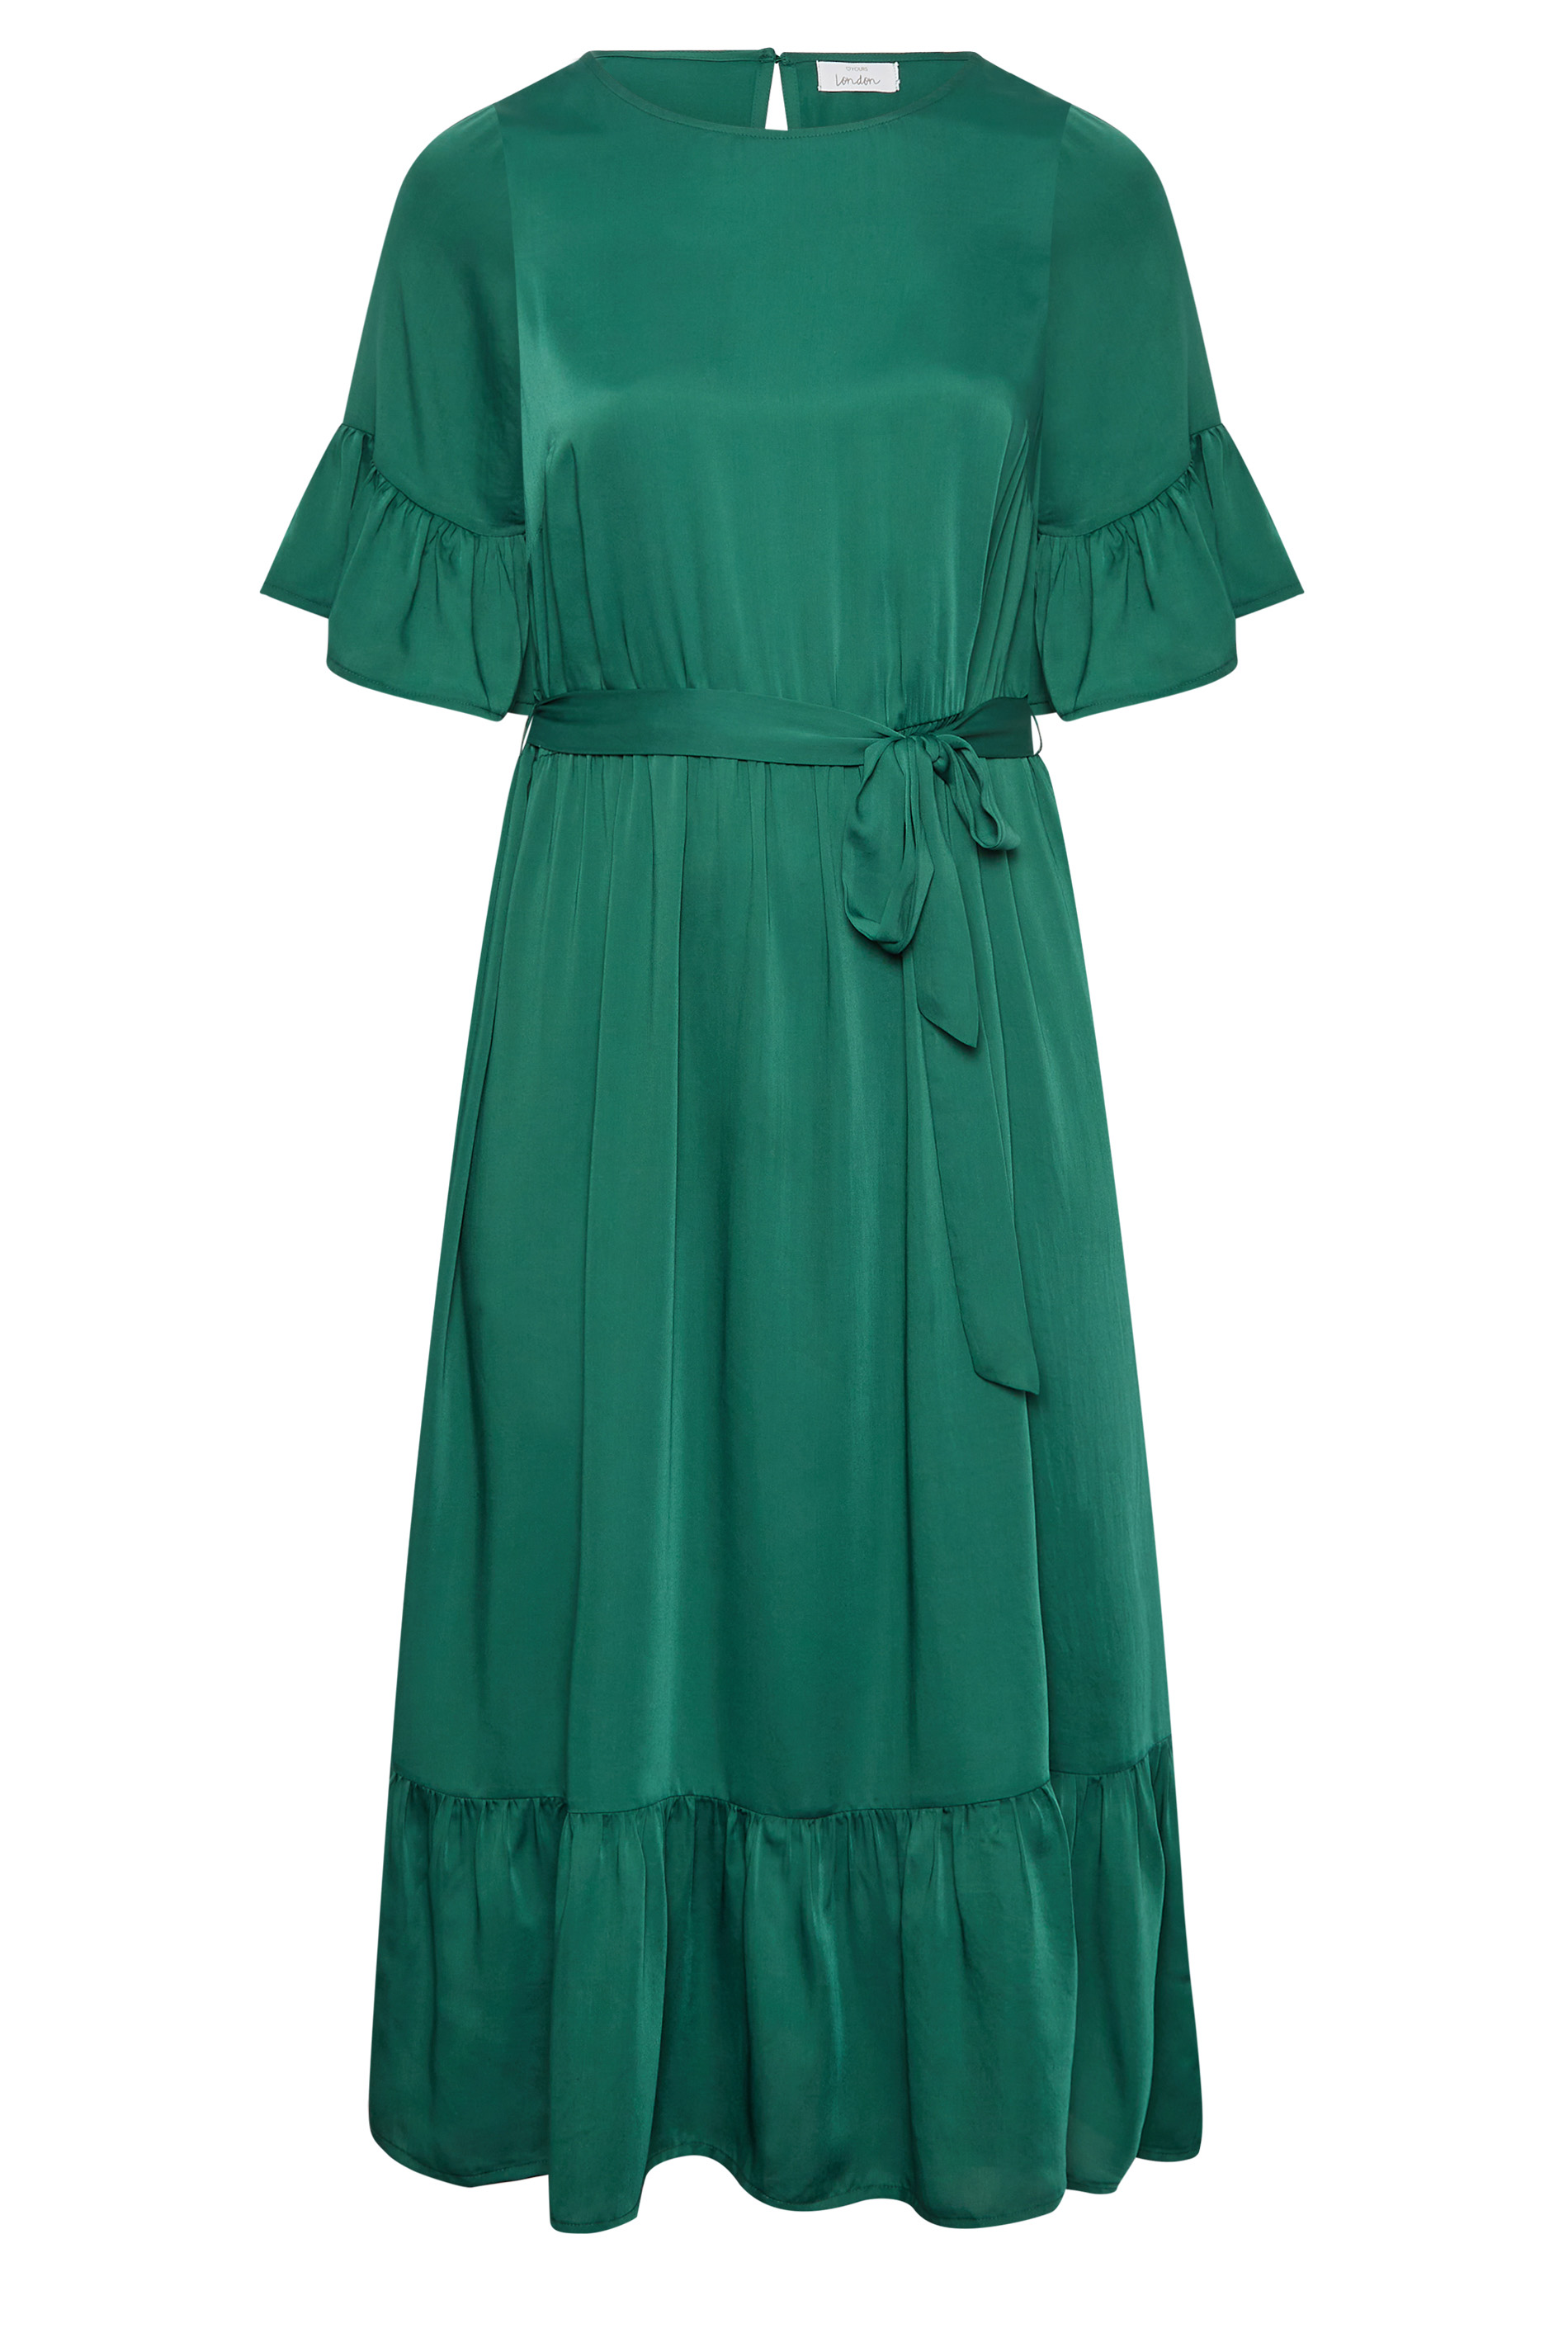 YOURS LONDON Plus Size Curve Green Satin Smock Dress | Yours Clothing